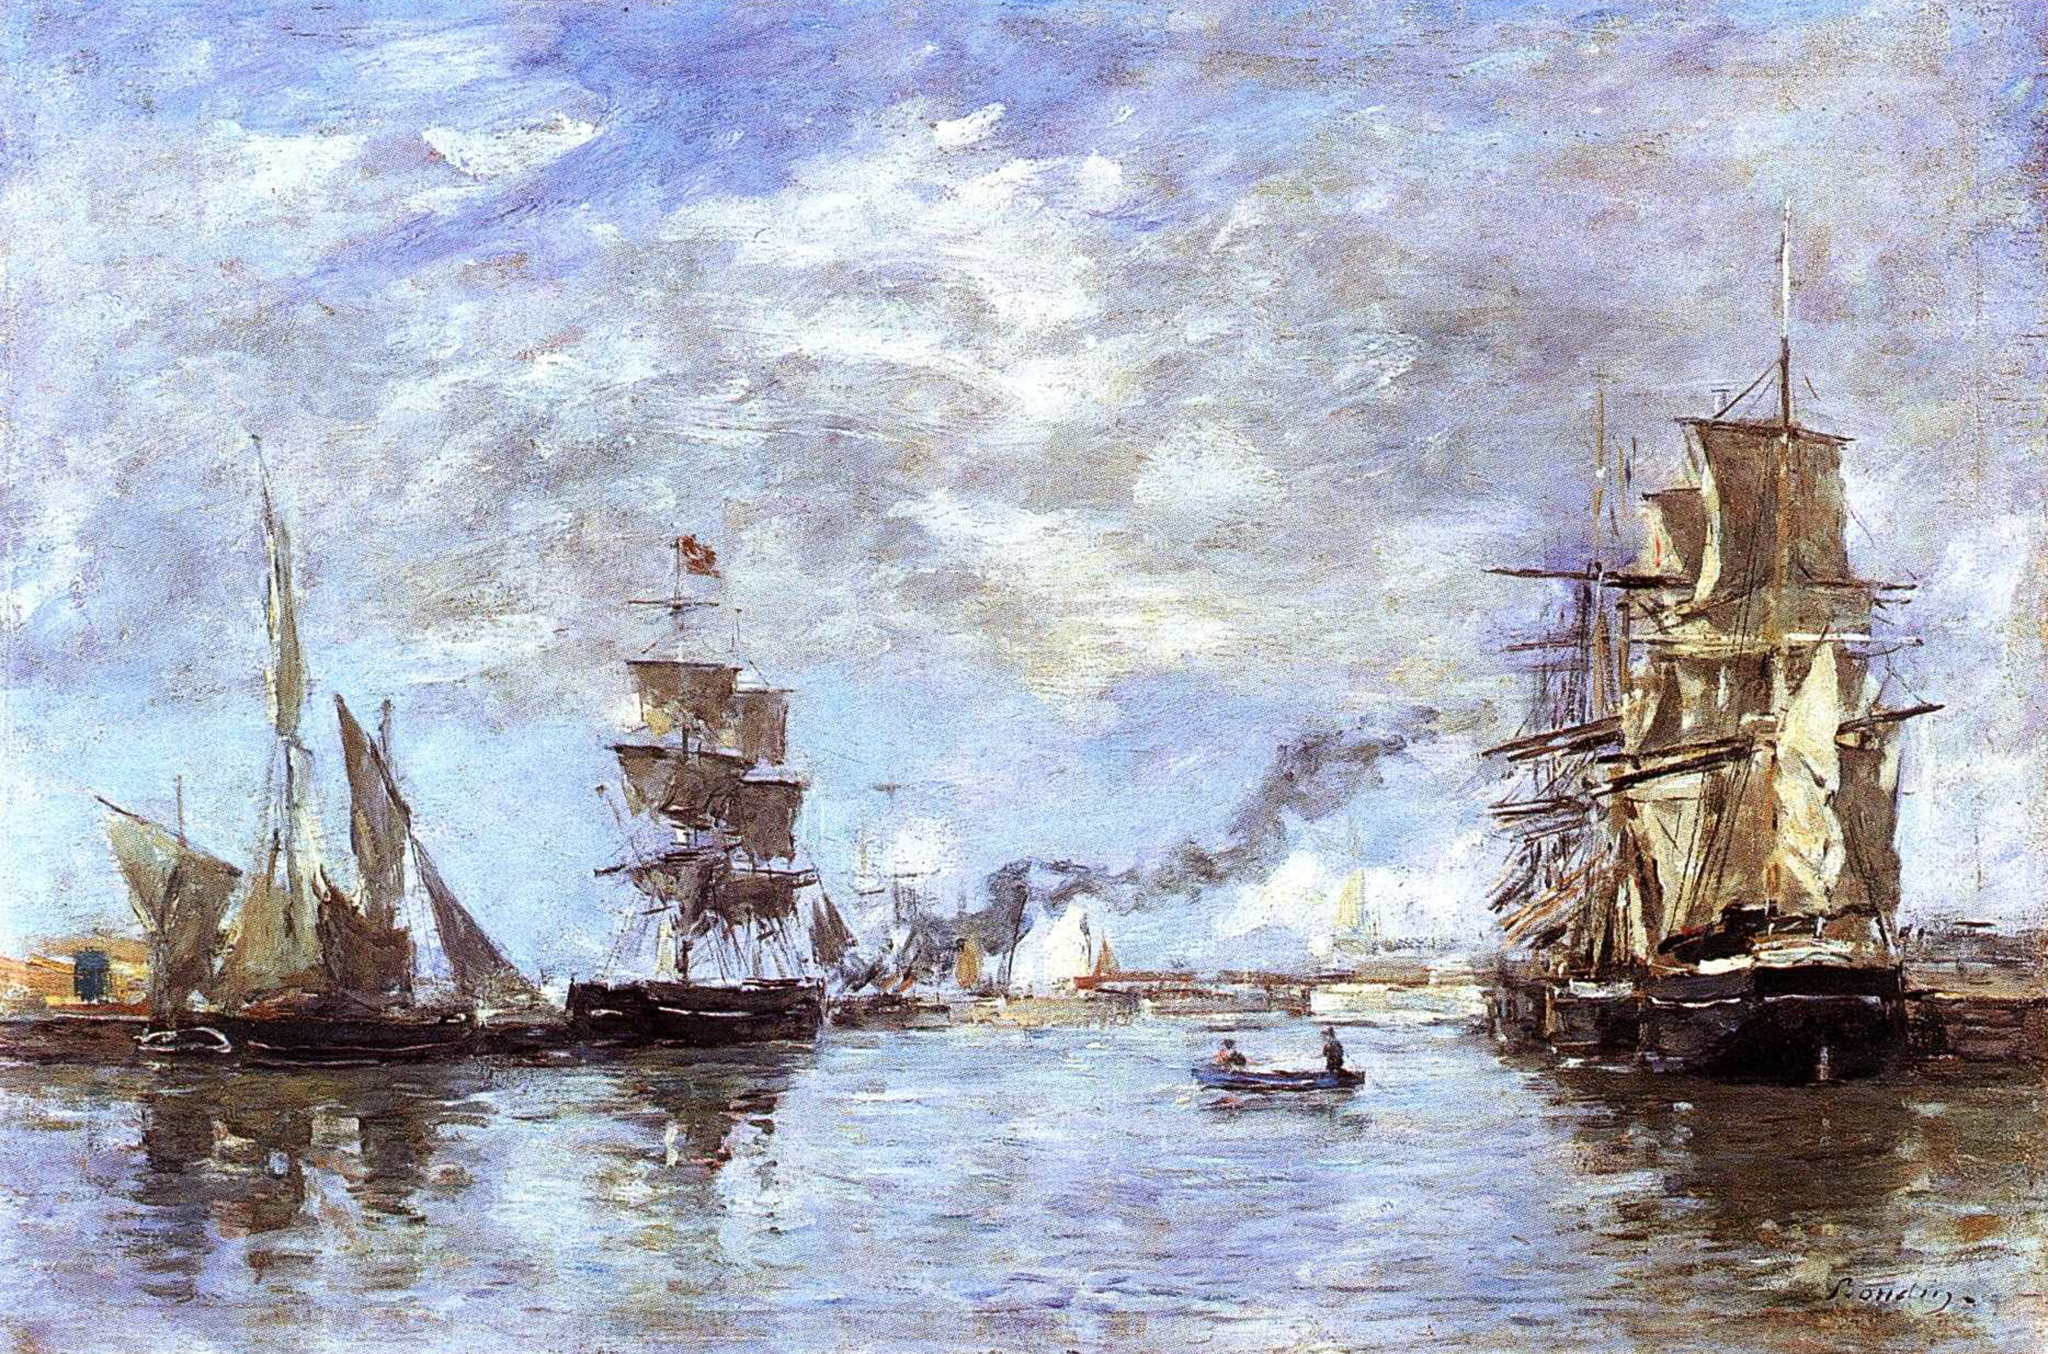 A painting of a port with large ships docked on the banks of the river. In the middle of the river there is a small boat with two people on it. In the background there is smoke exiting from the one of the ships in the distance.